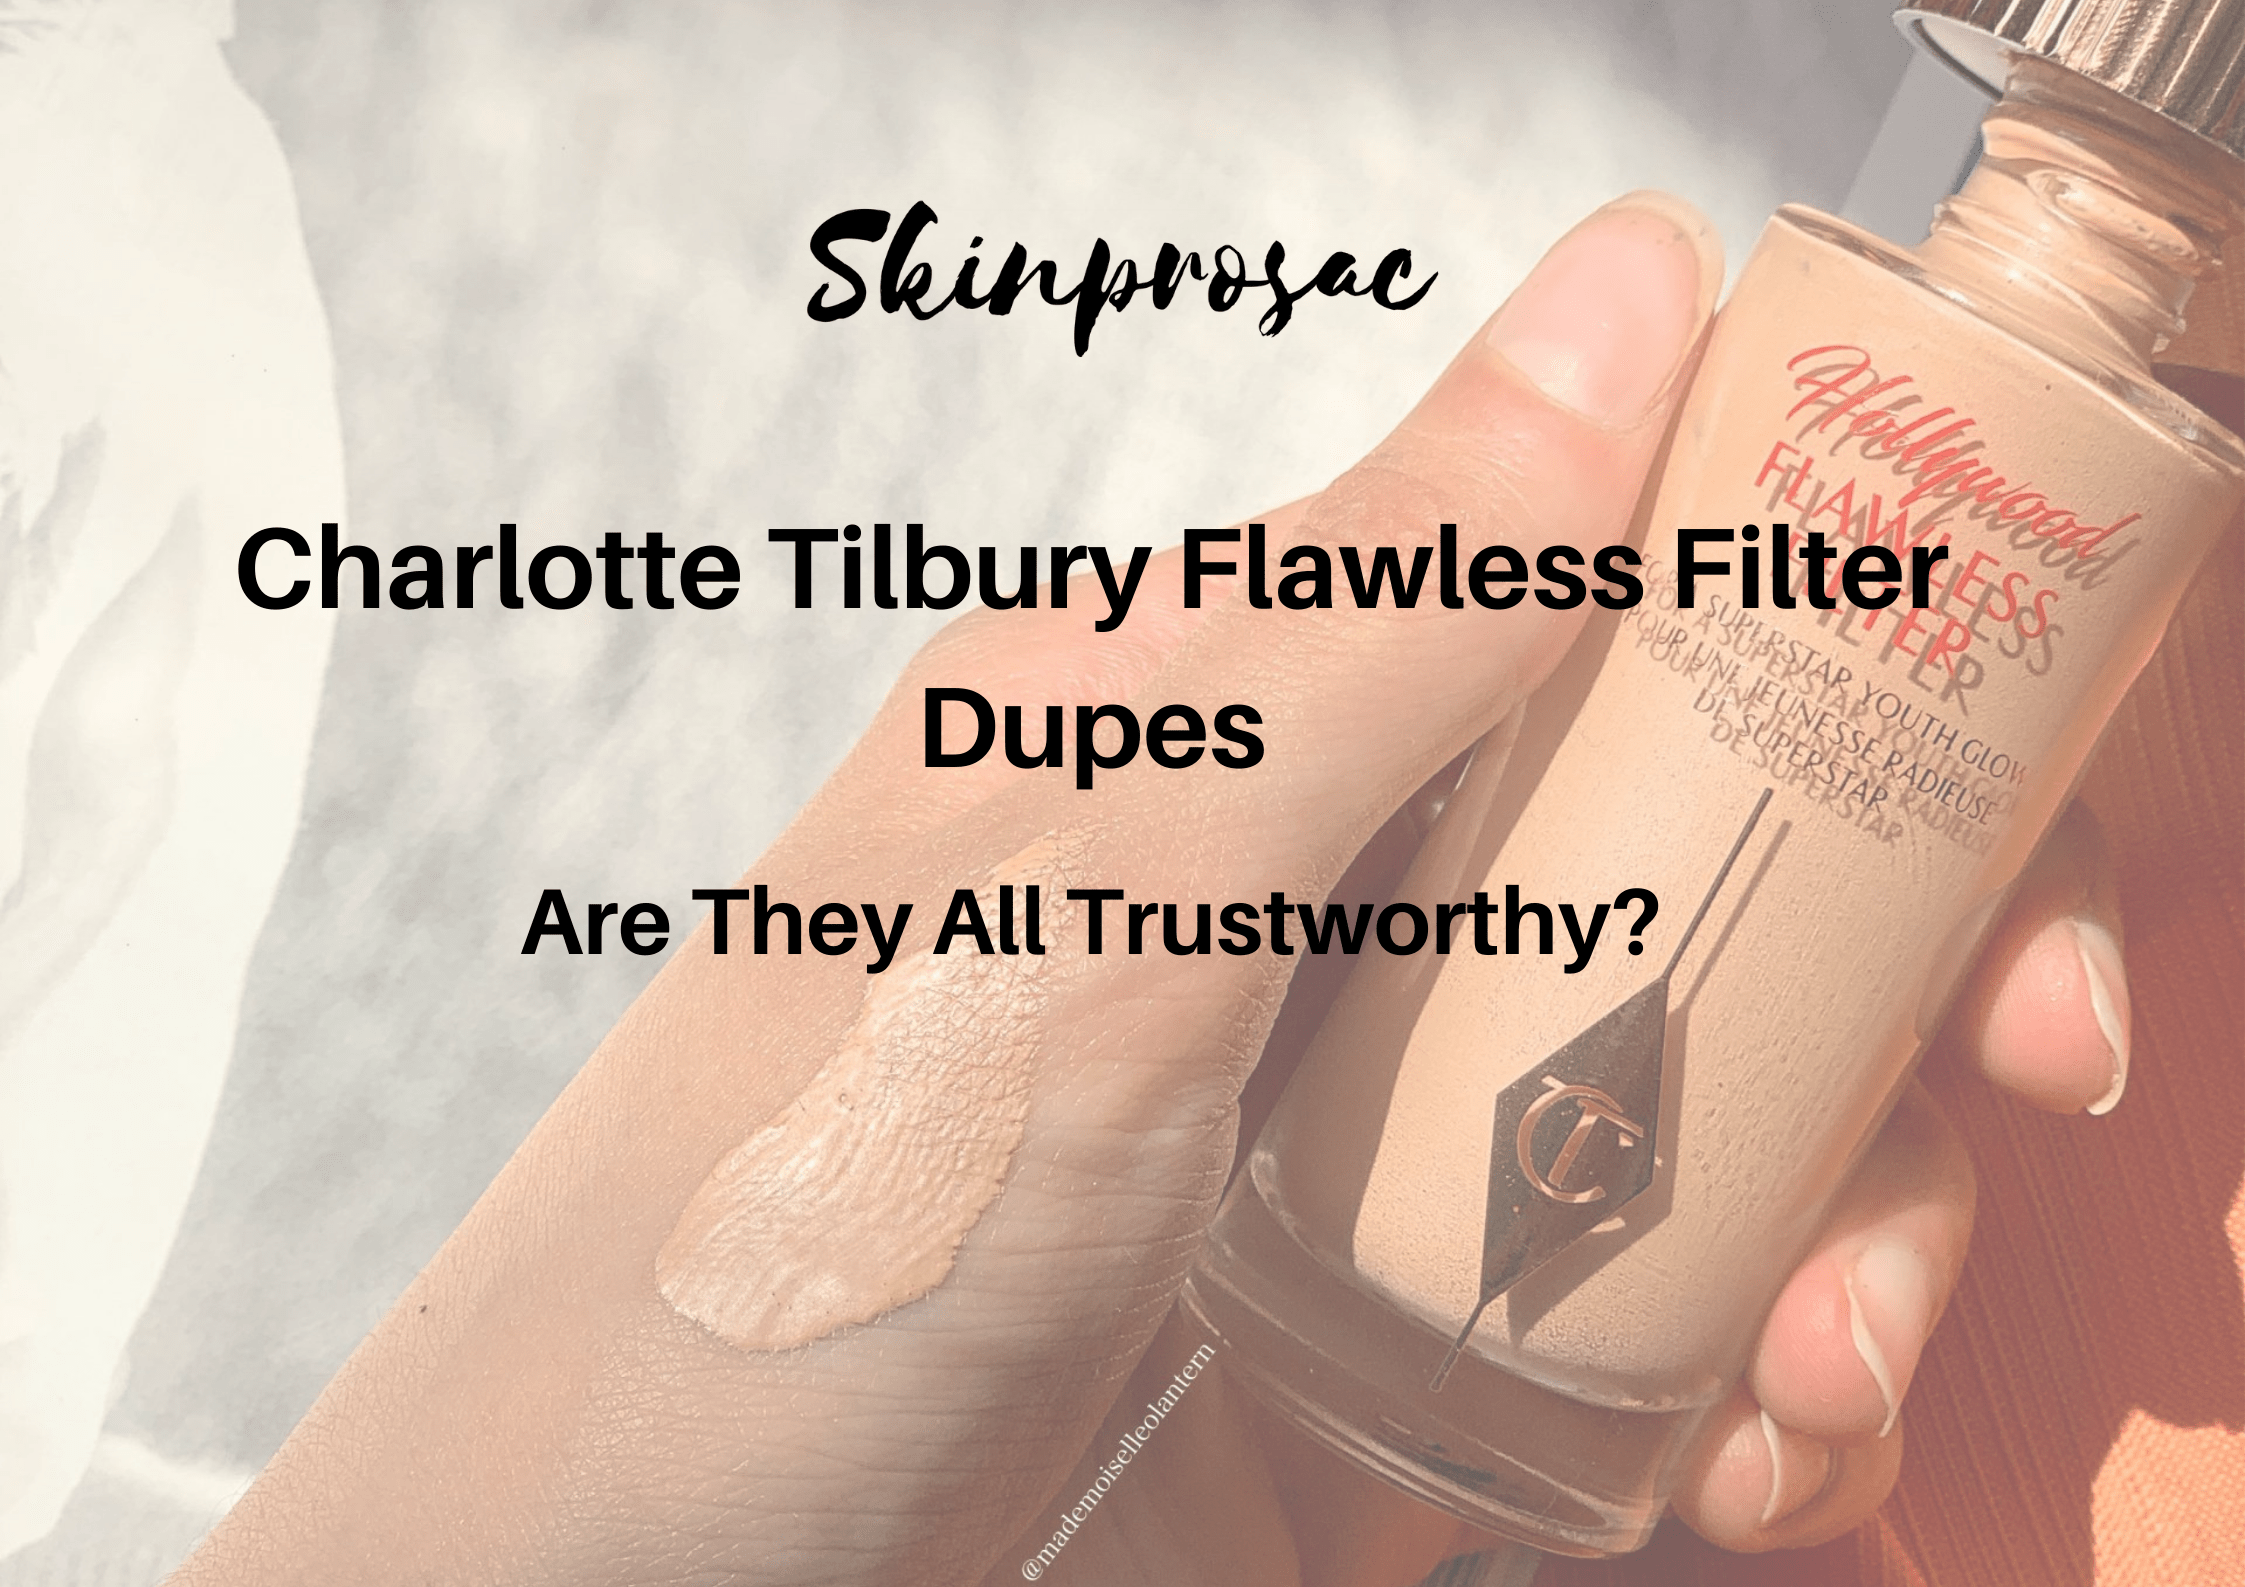 Charlotte Tilbury Flawless Filter Dupes